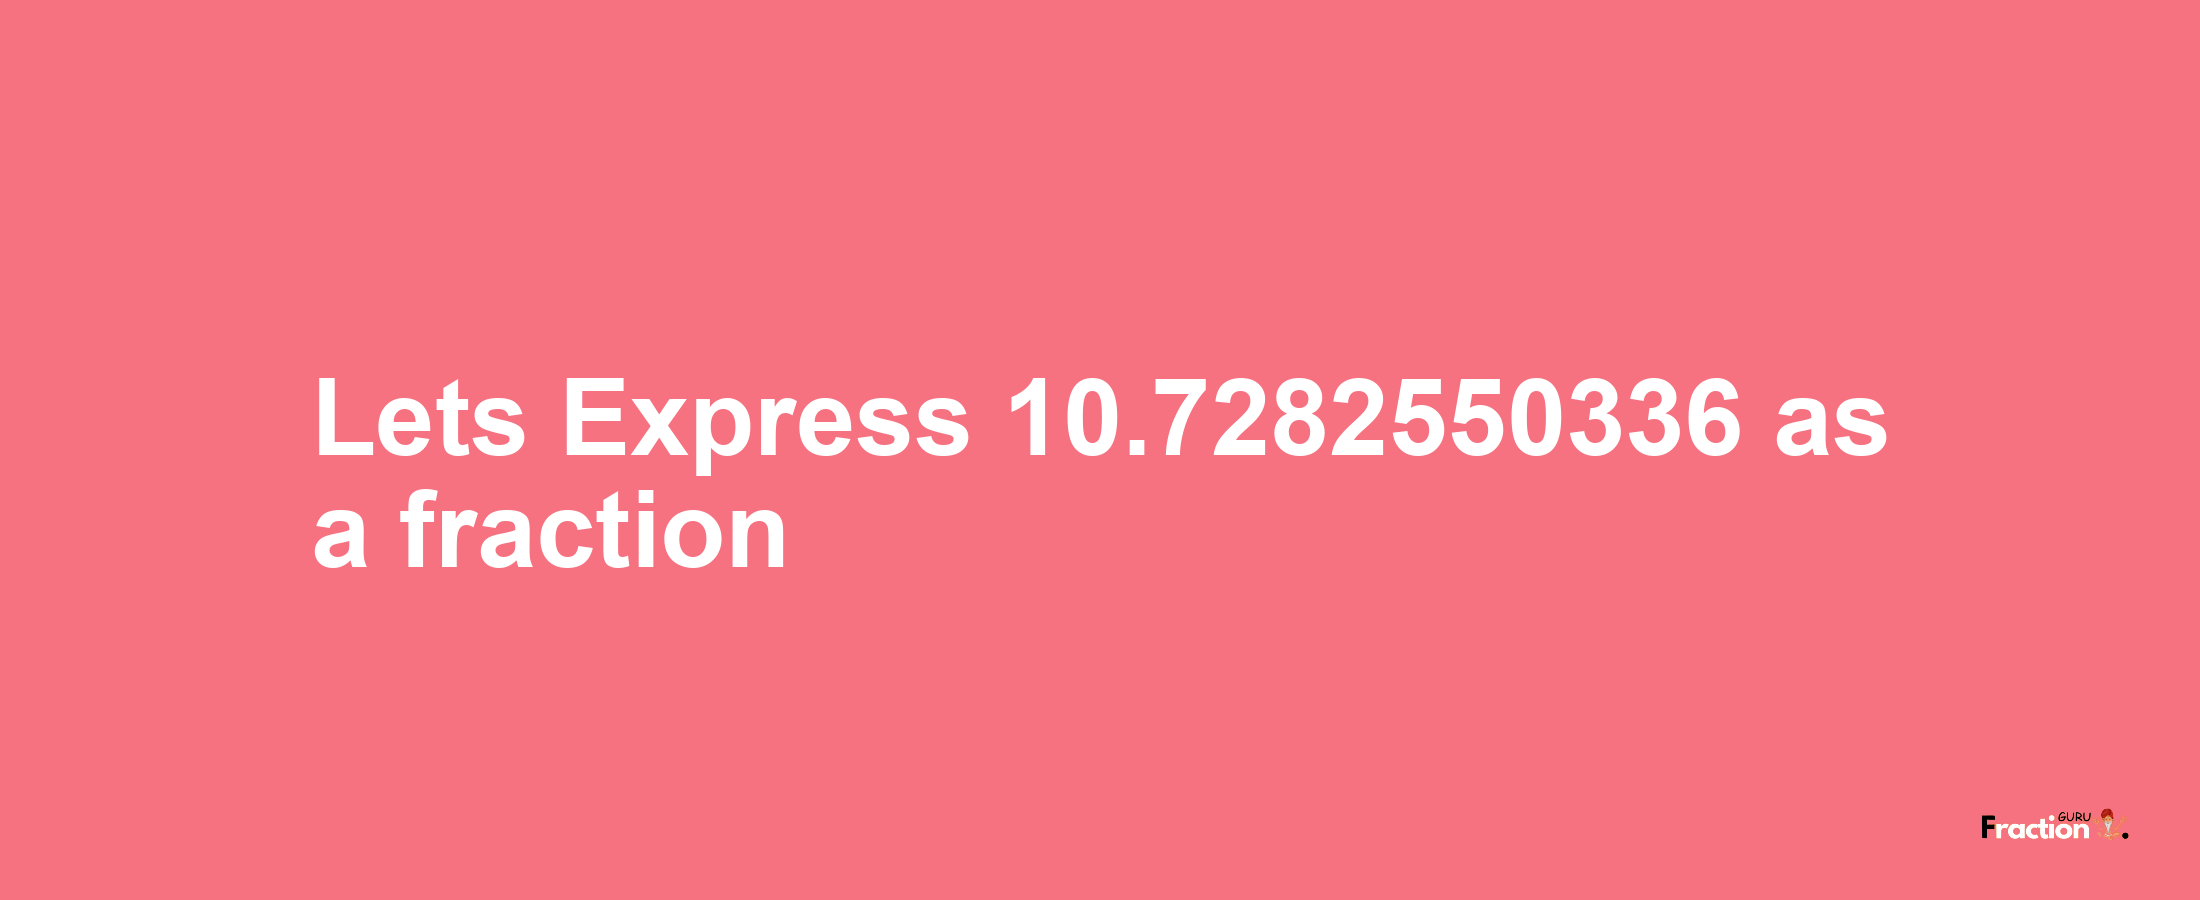 Lets Express 10.7282550336 as afraction